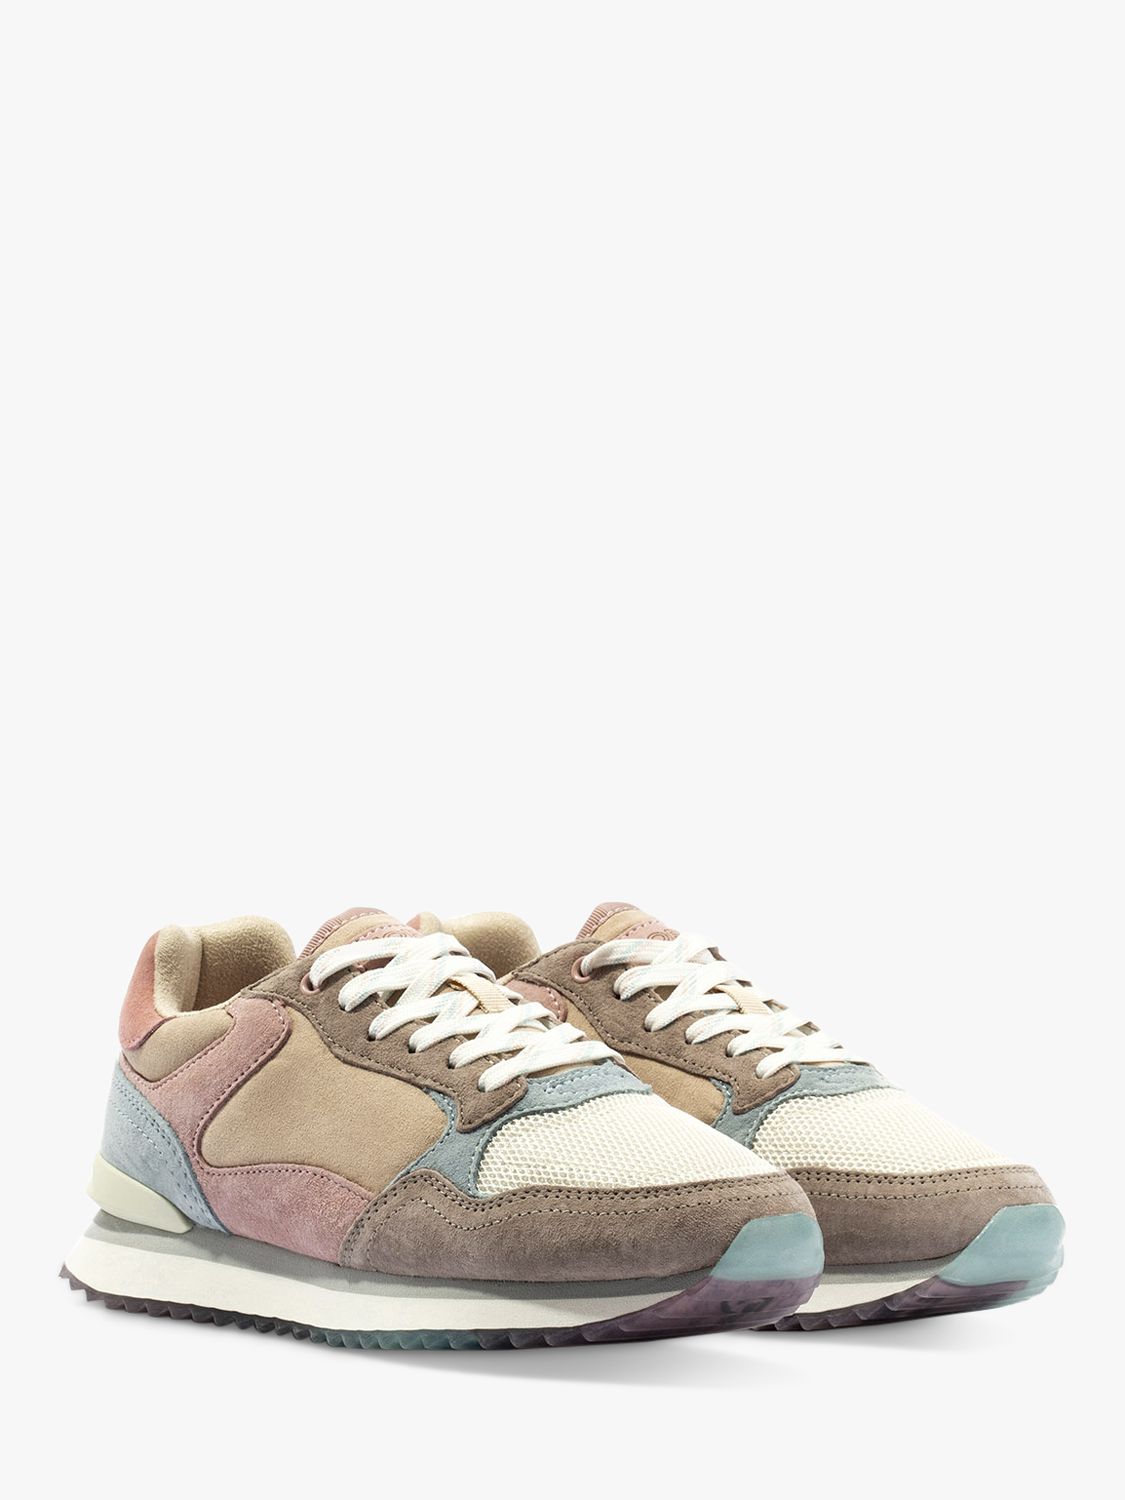 Buy HOFF Barcelona Suede Lace Up Trainers, Multi Online at johnlewis.com